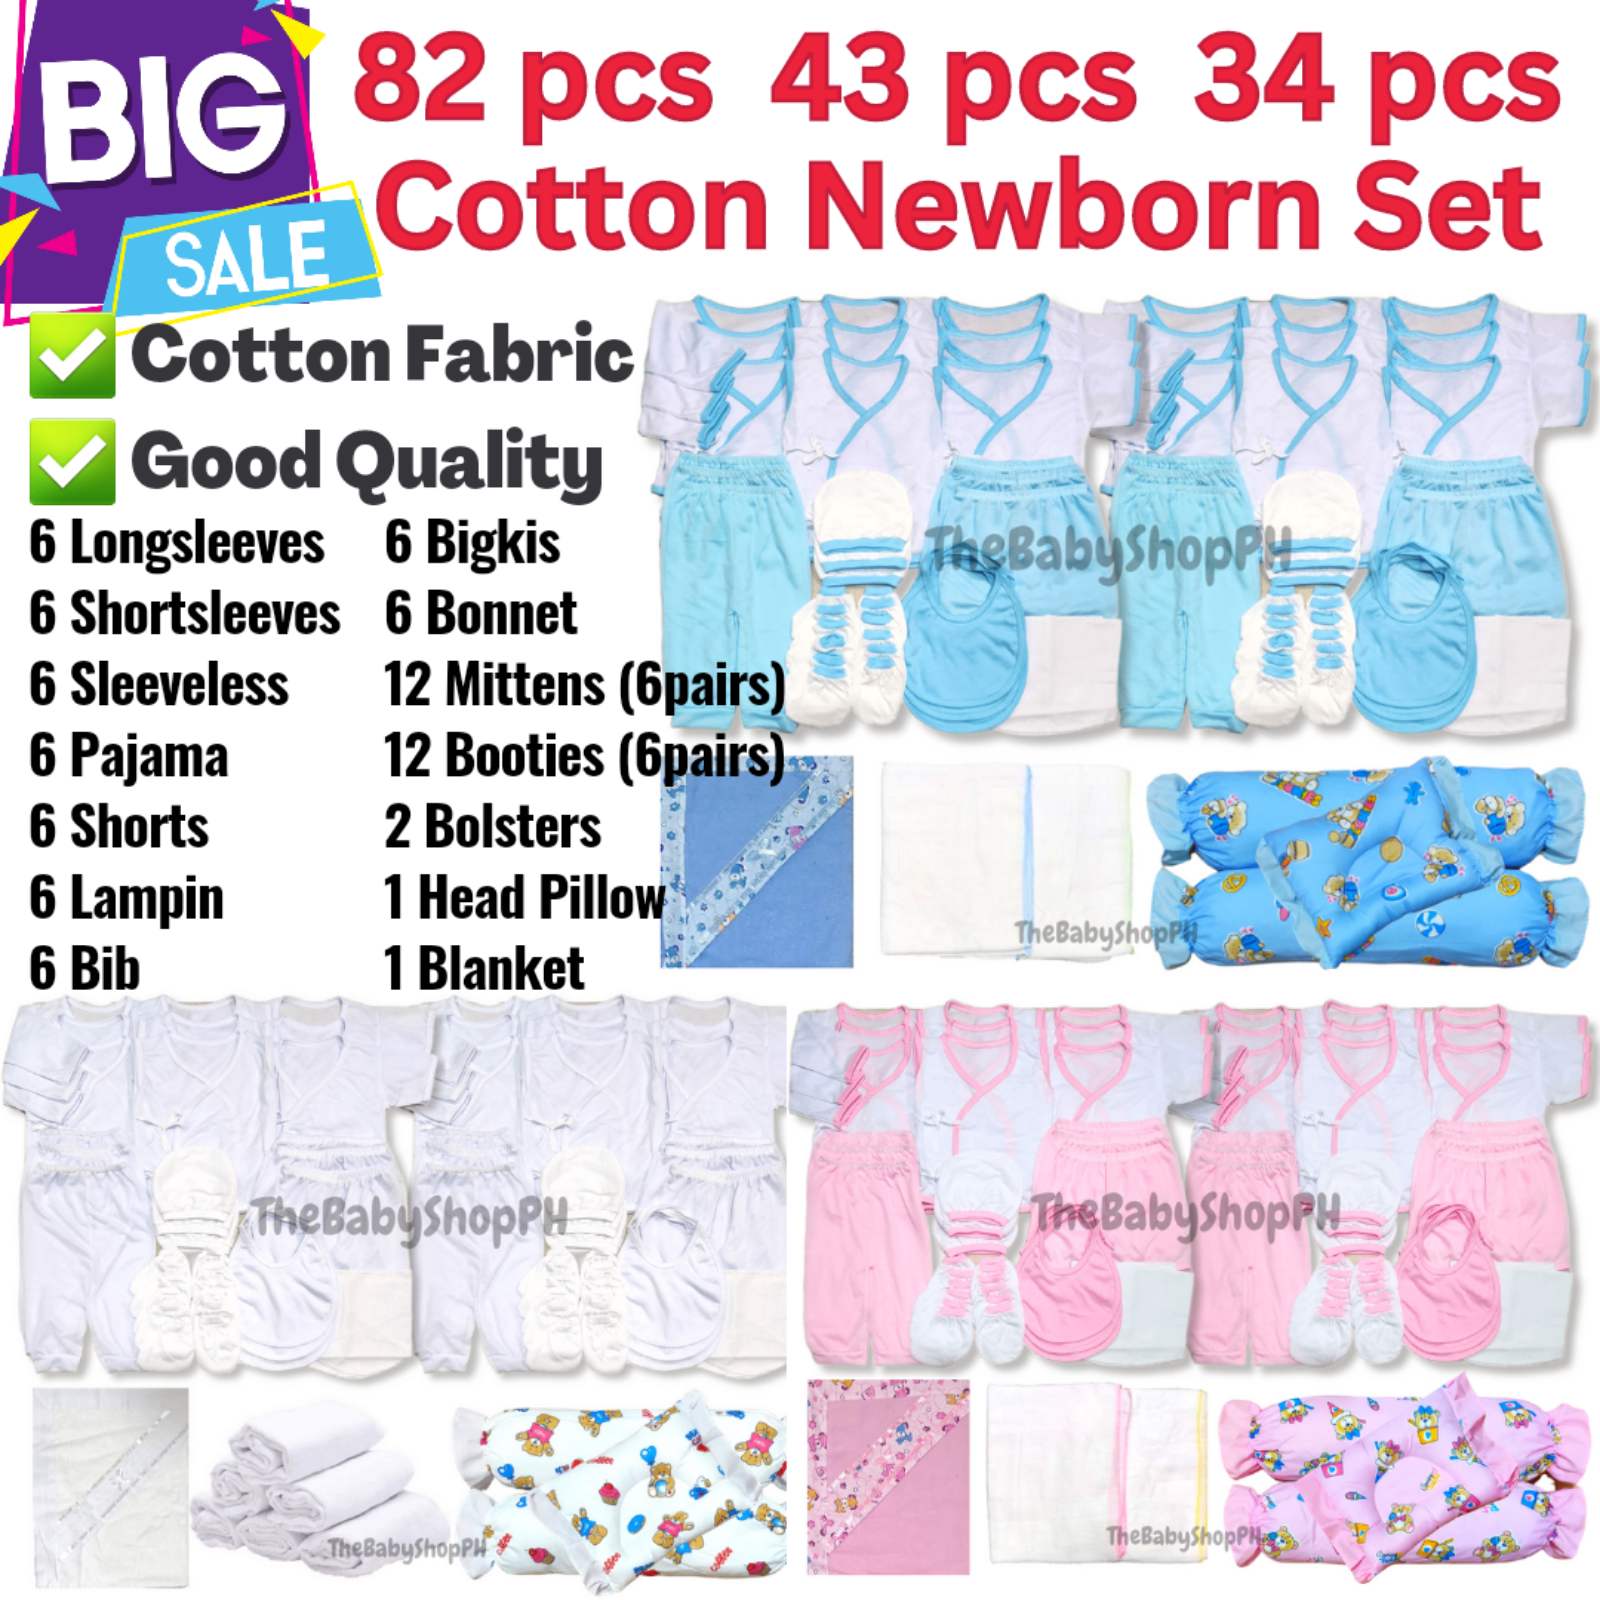 Makapal Cotton Newborn Baby Clothes Set with Blanket and Pillows